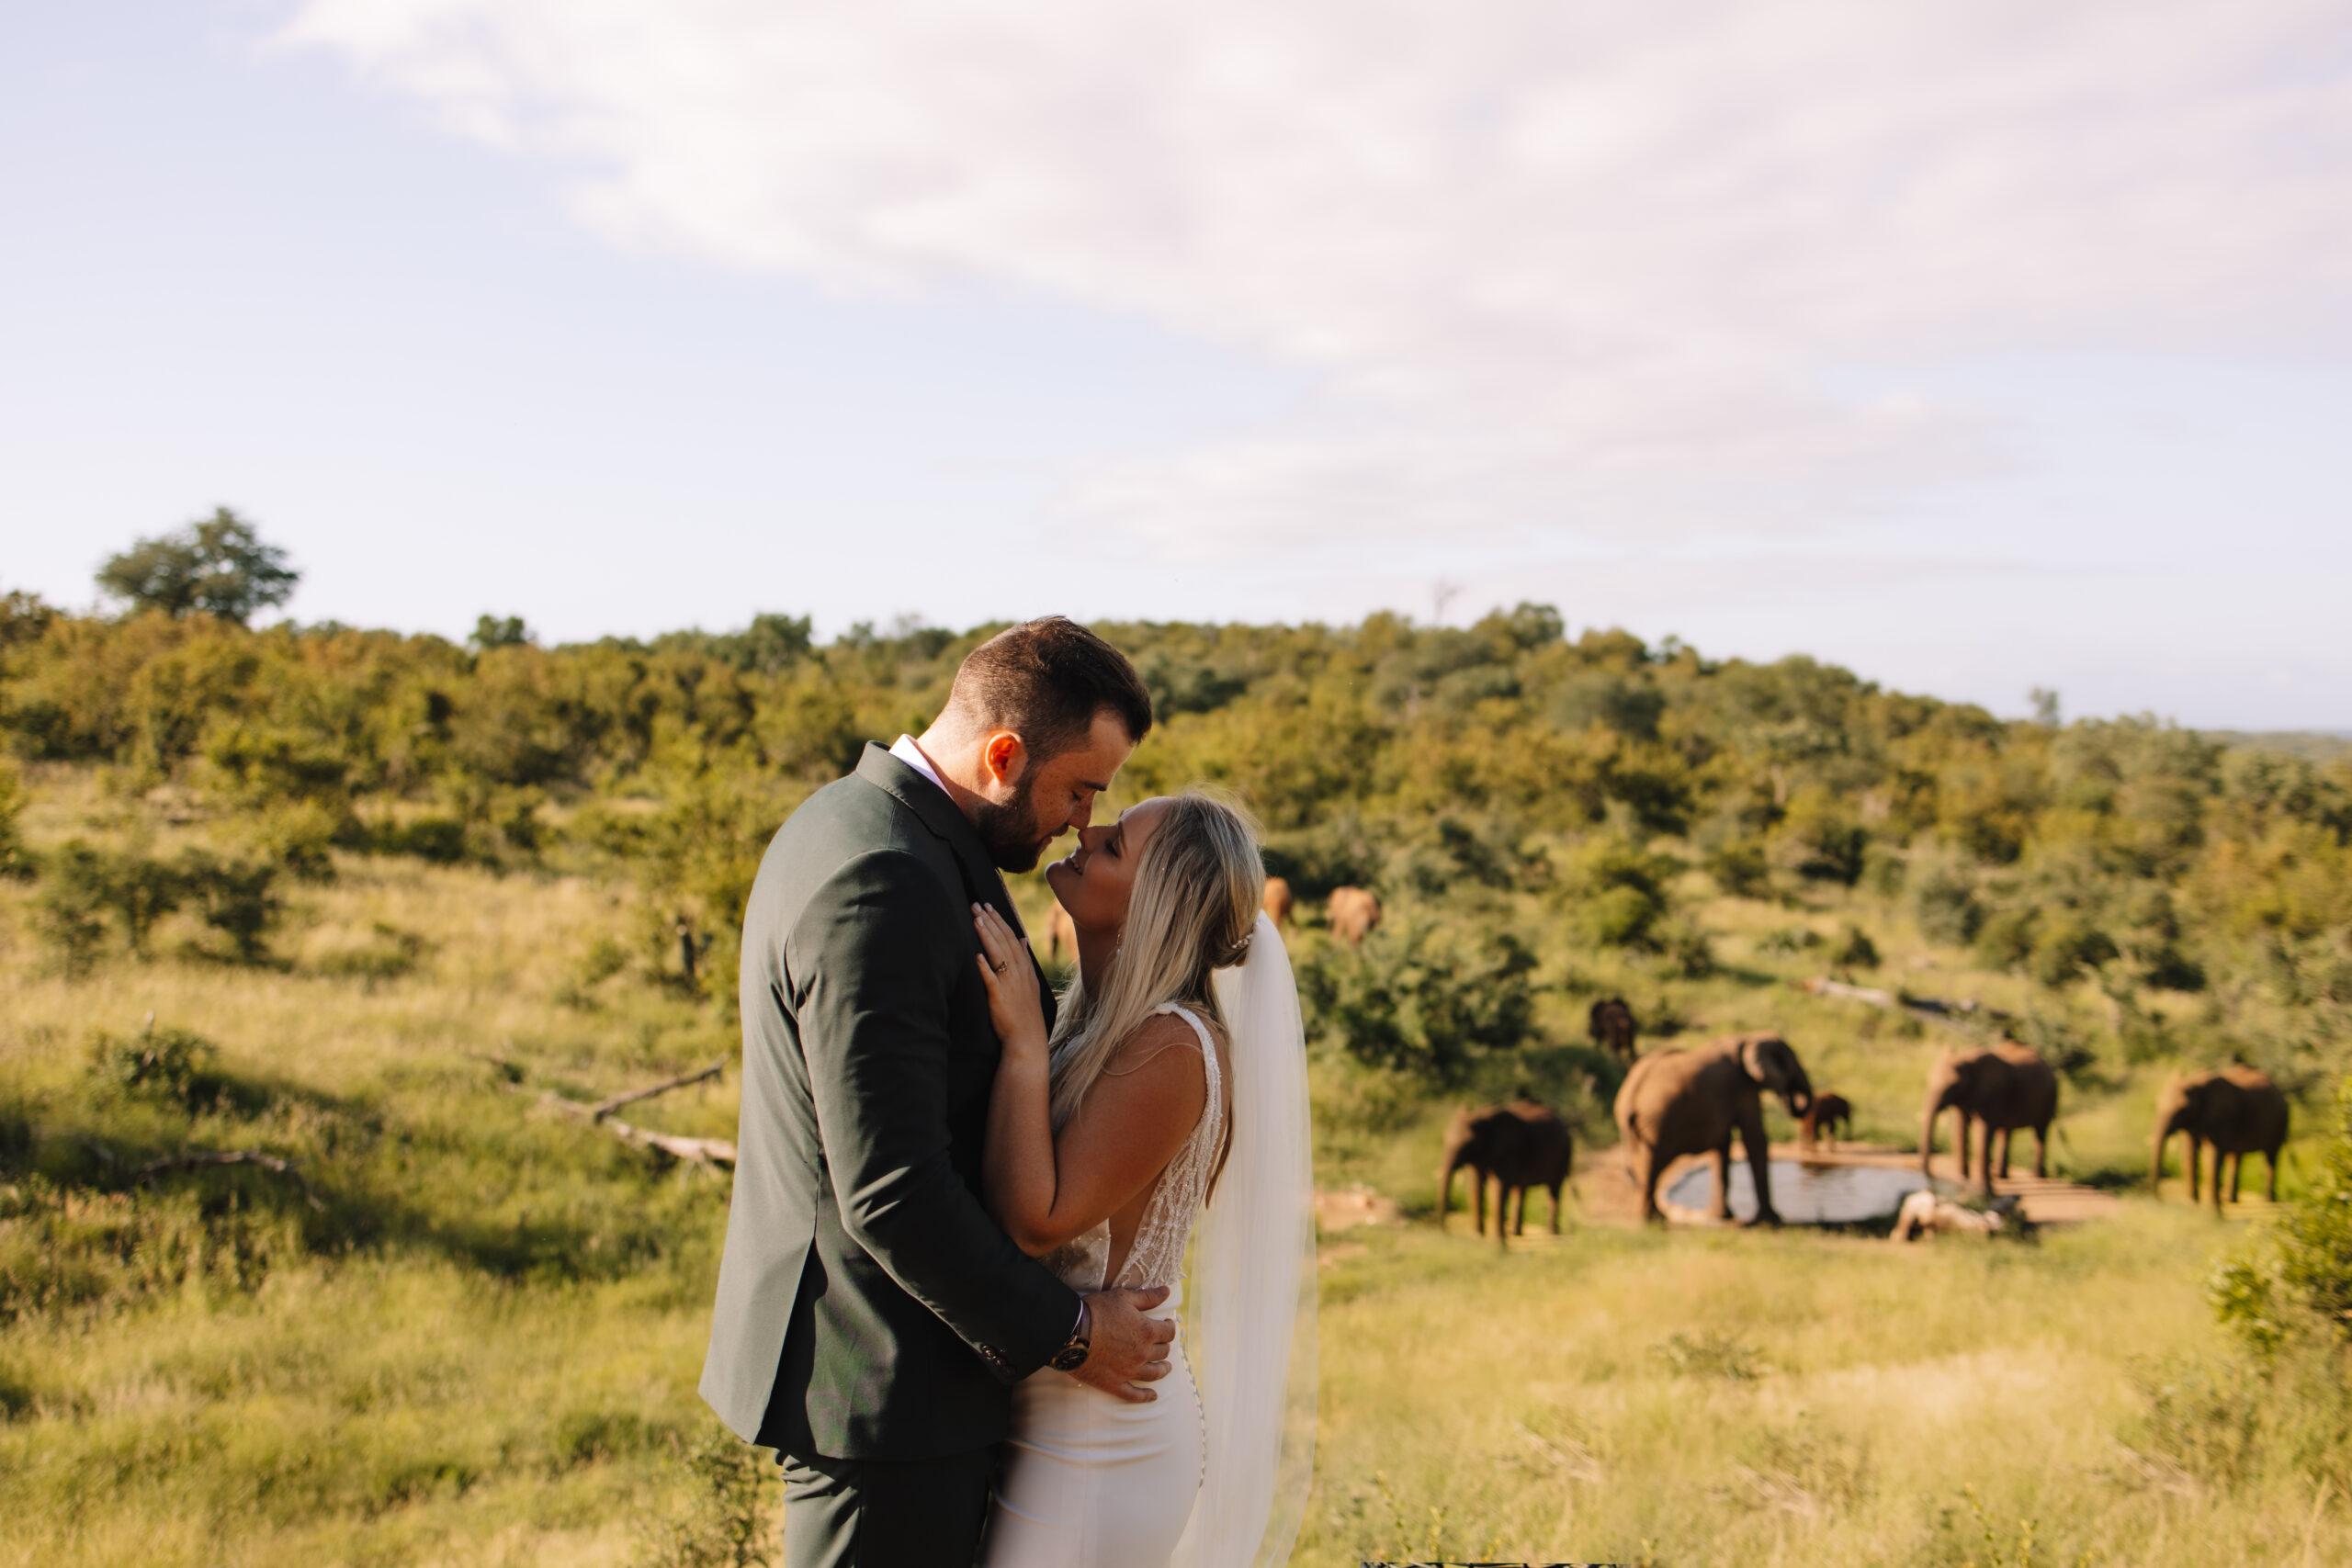 Bride and groom holding each other with elephants in the background at a safari lodge in South Africa